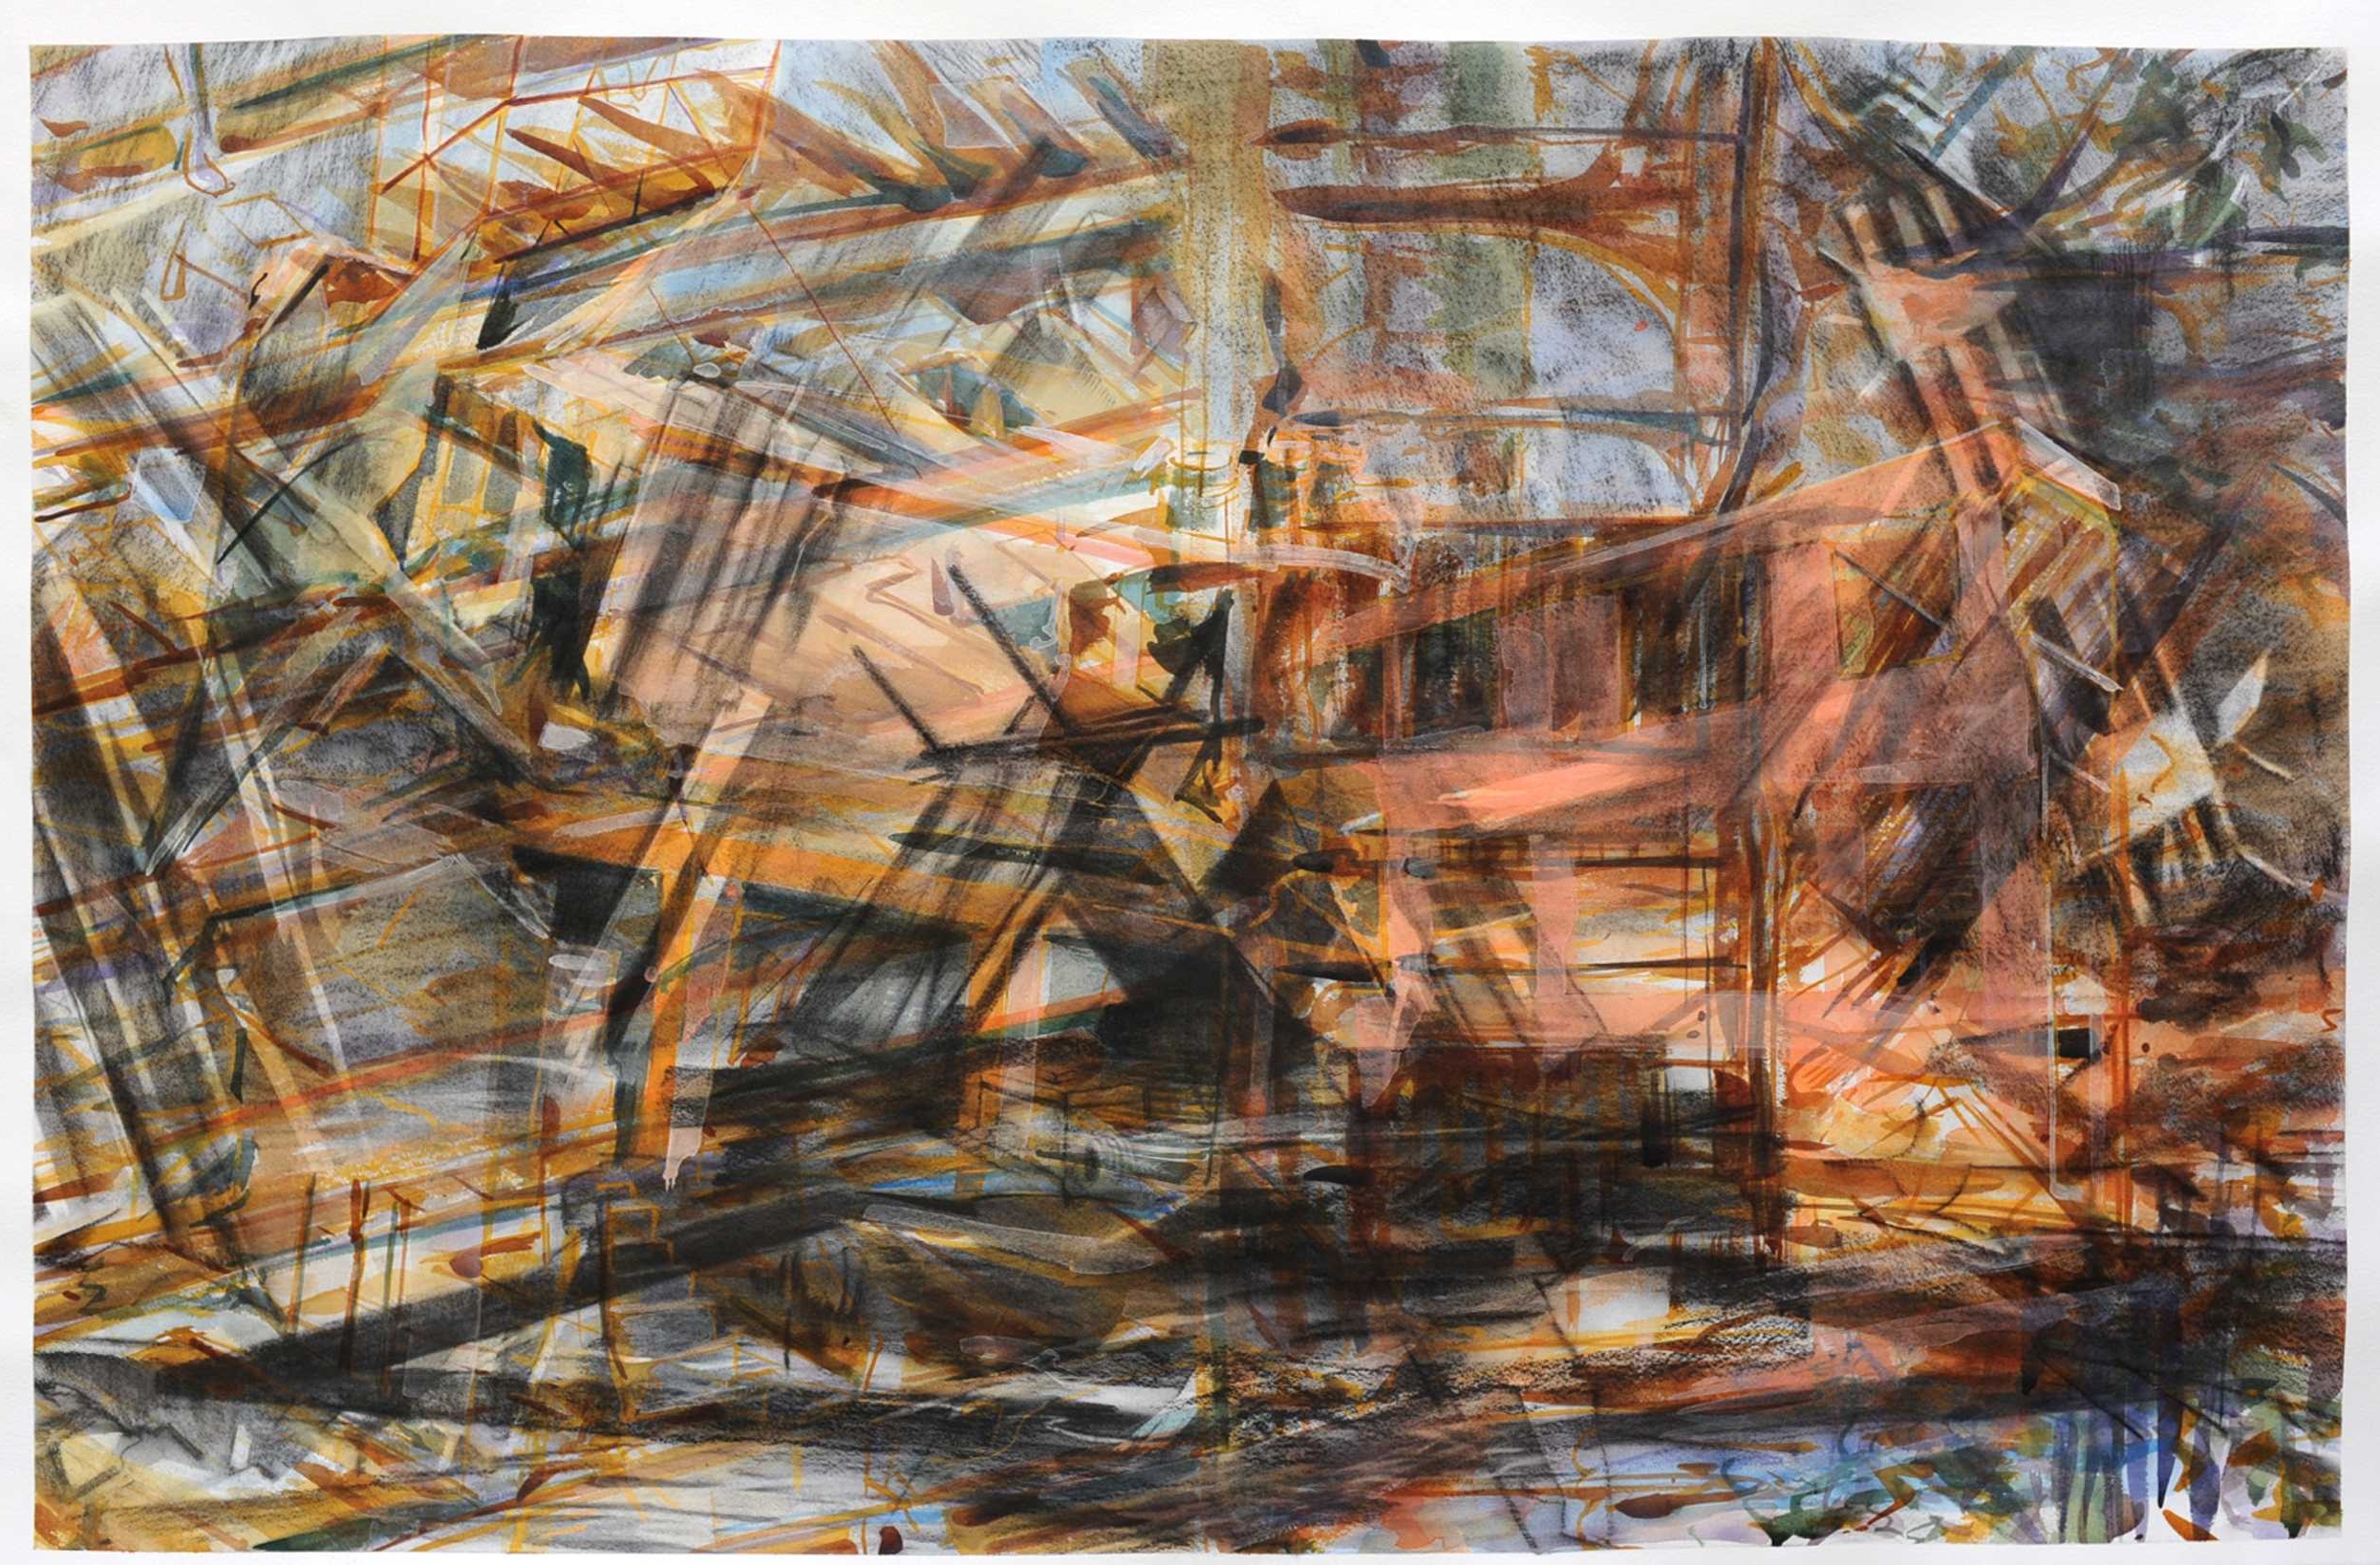   Untitled (mobile home) , 2011, &nbsp;charcoal and watercolour on paper,&nbsp;90 x 140cm. Private collection, Israel 